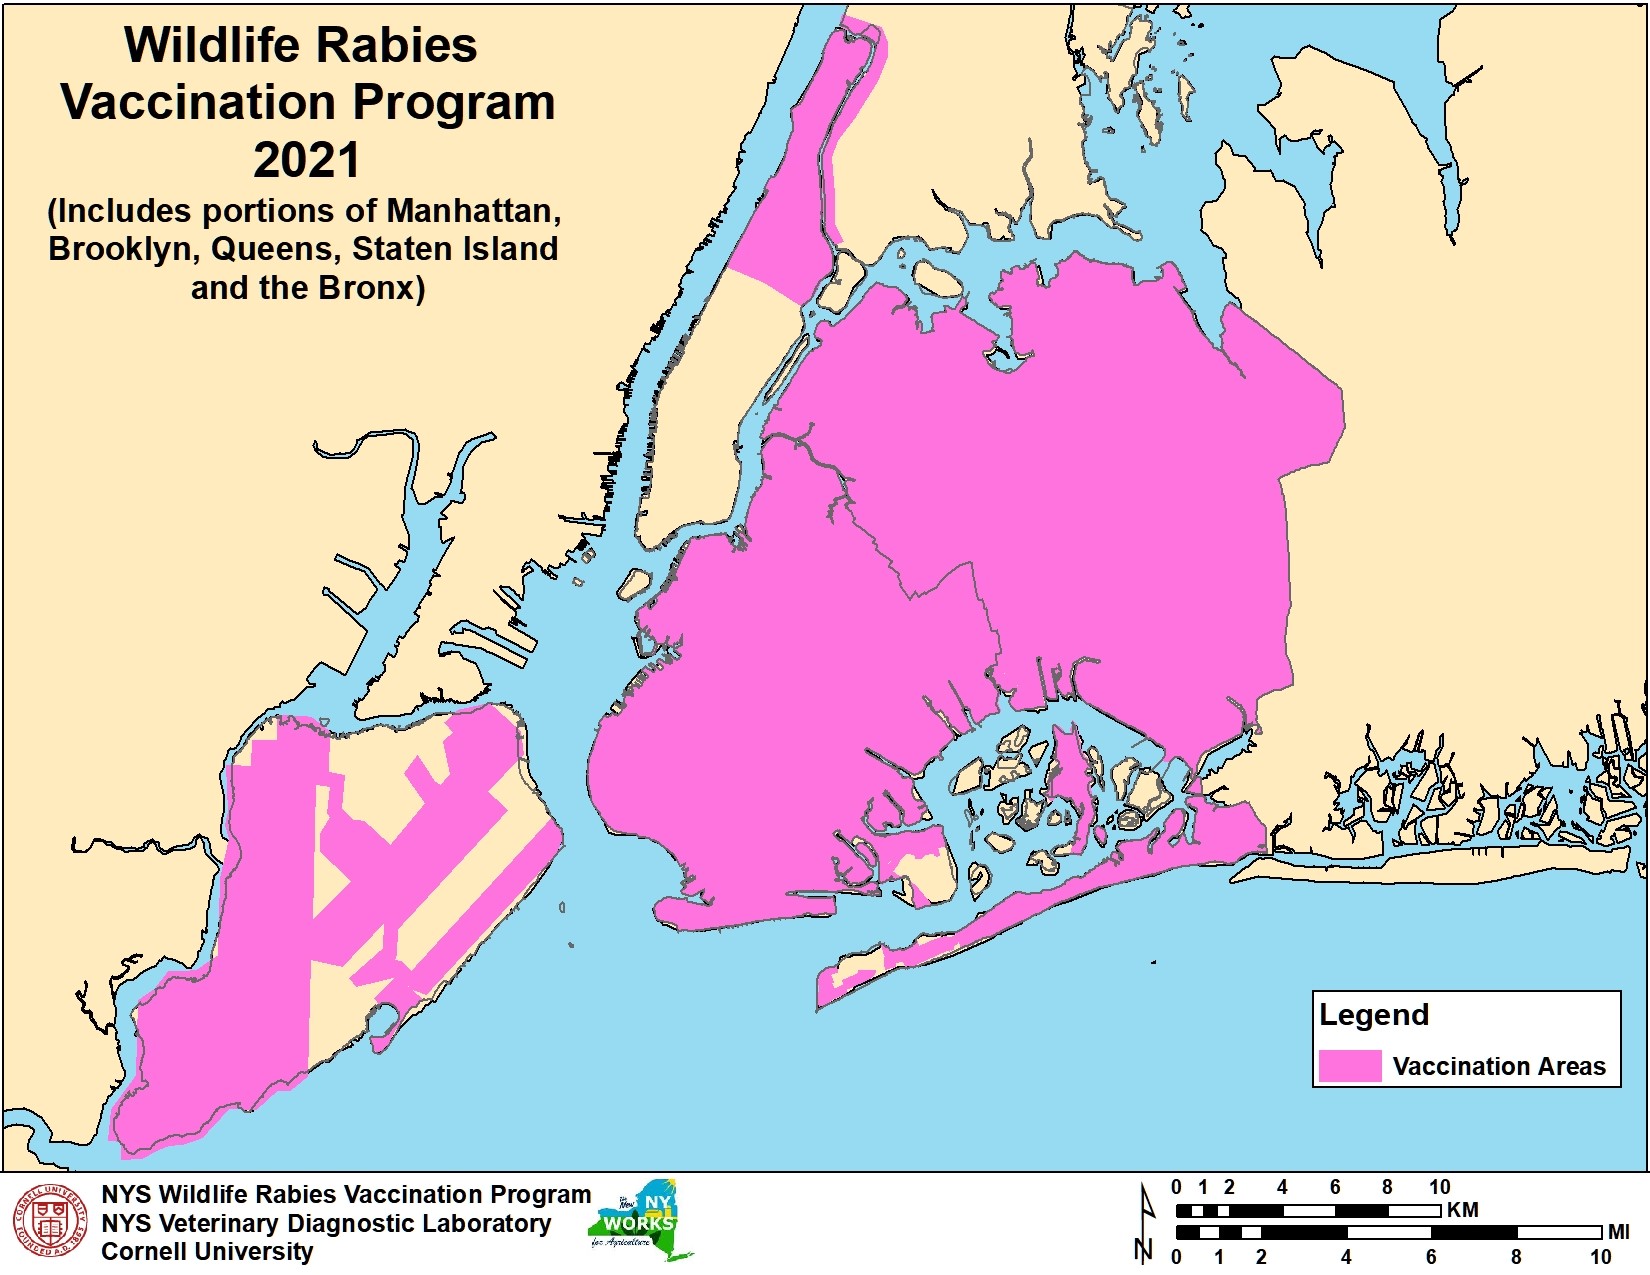 A map showing the 5 borough's and the coordinating areas where the vaccination program will take place